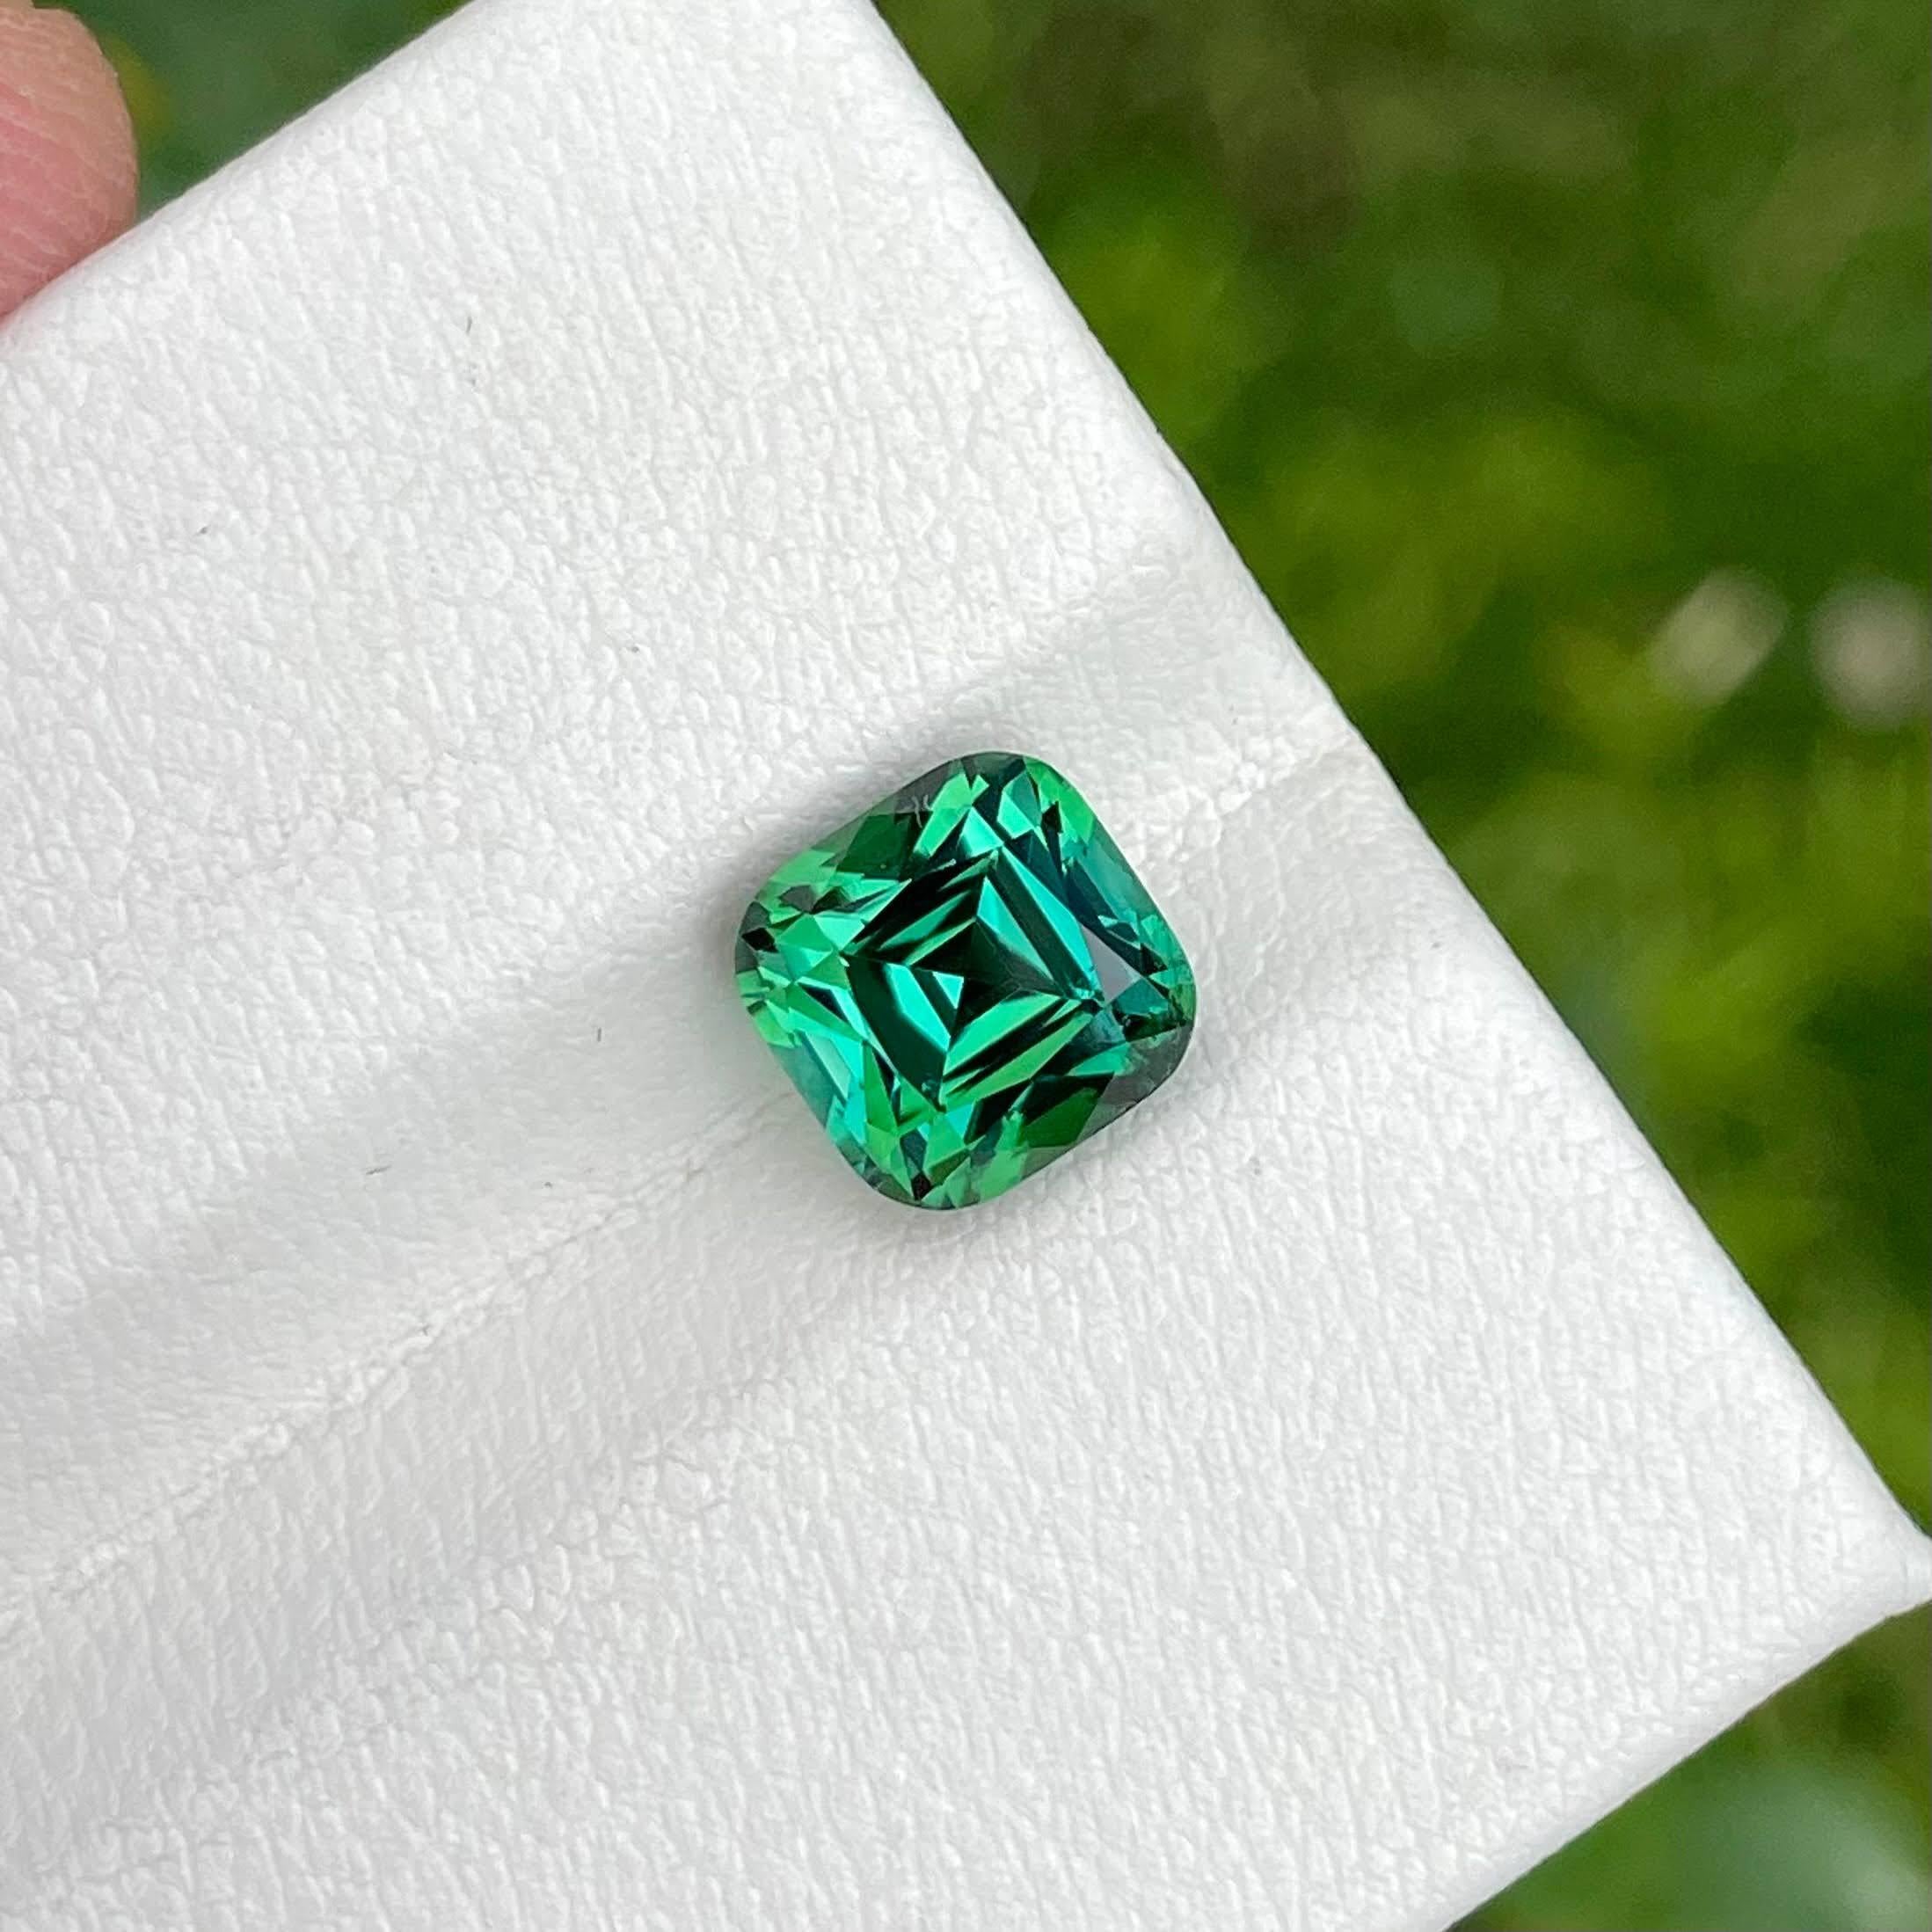 Weight 3.25 carats 
Dimensions 7.7x7.6x7.05 mm
Treatment none 
Origin Afghanistan 
Clarity VVS
Shape cushion
Cut fancy cushion 





The exquisite beauty of a 3.25 carats Greenish Blue Tourmaline Stone takes center stage in this remarkable gem.